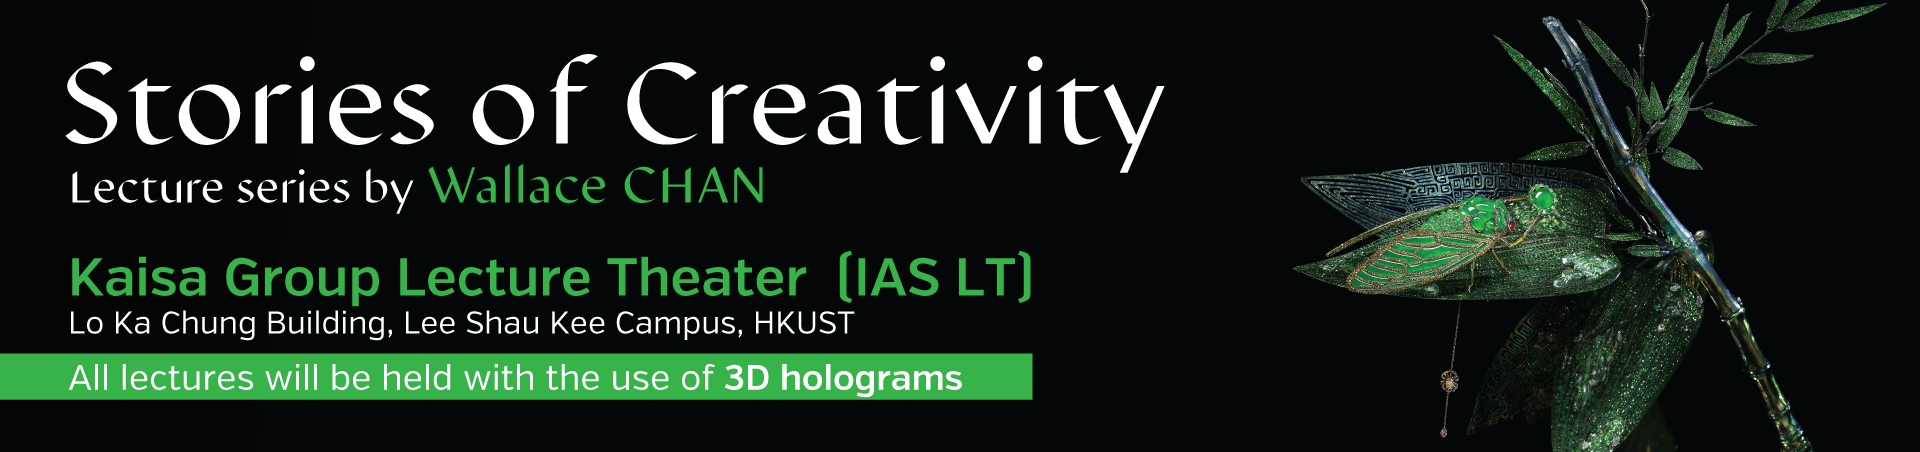 Event - Materials and Creativity by Mr. Wallace CHAN & Dr. Emily STOEHRER (Sep 22)